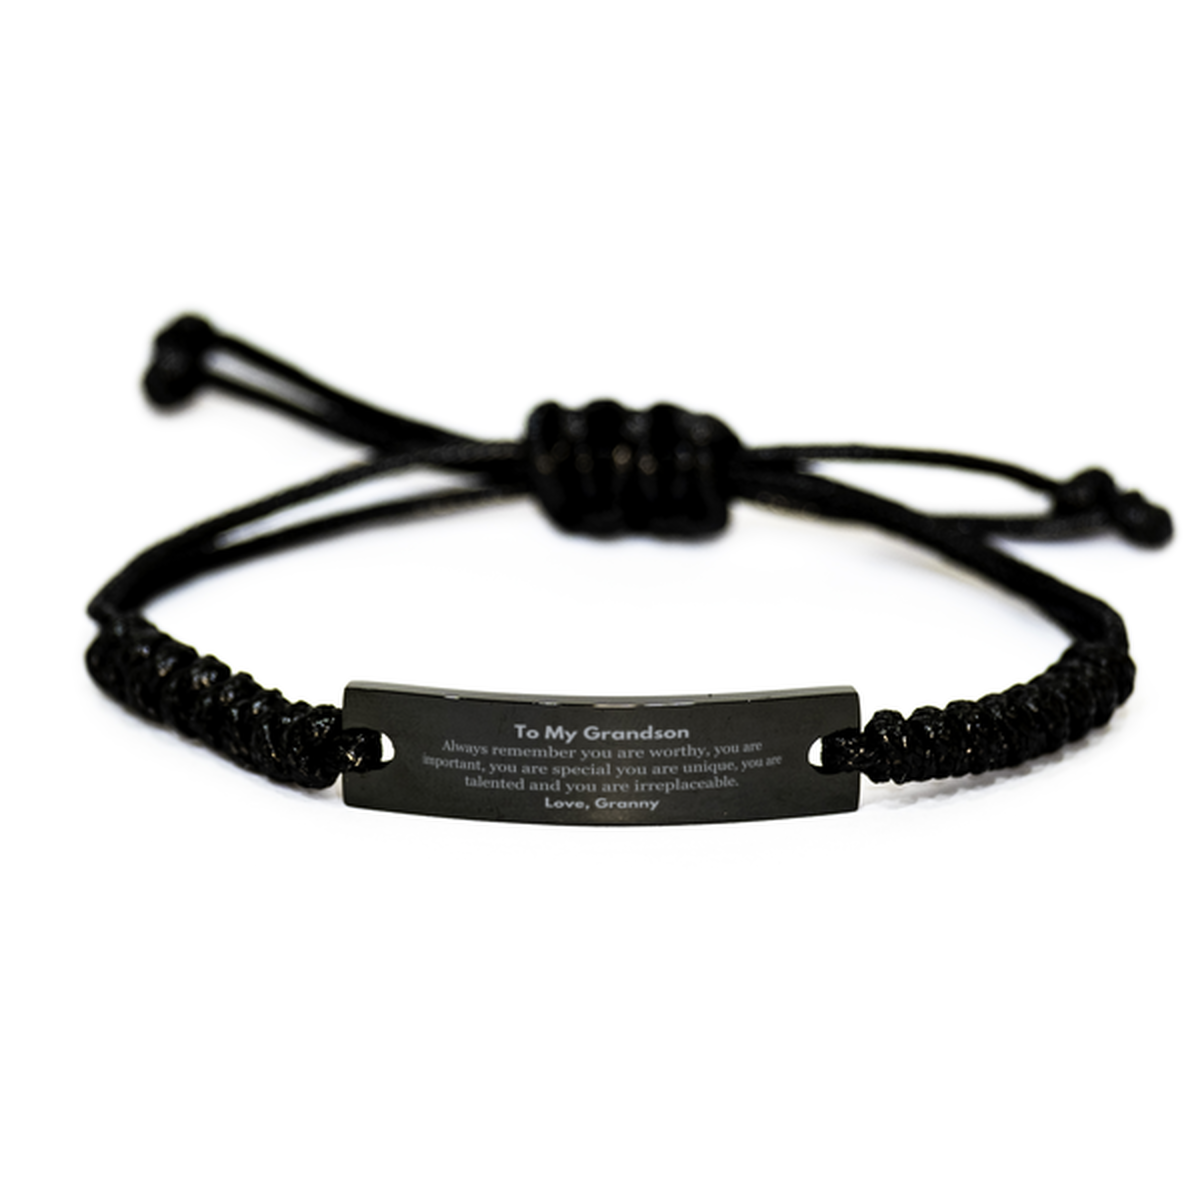 Grandson Birthday Gifts from Granny, Inspirational Black Rope Bracelet for Grandson Christmas Graduation Gifts for Grandson Always remember you are worthy, you are important. Love, Granny